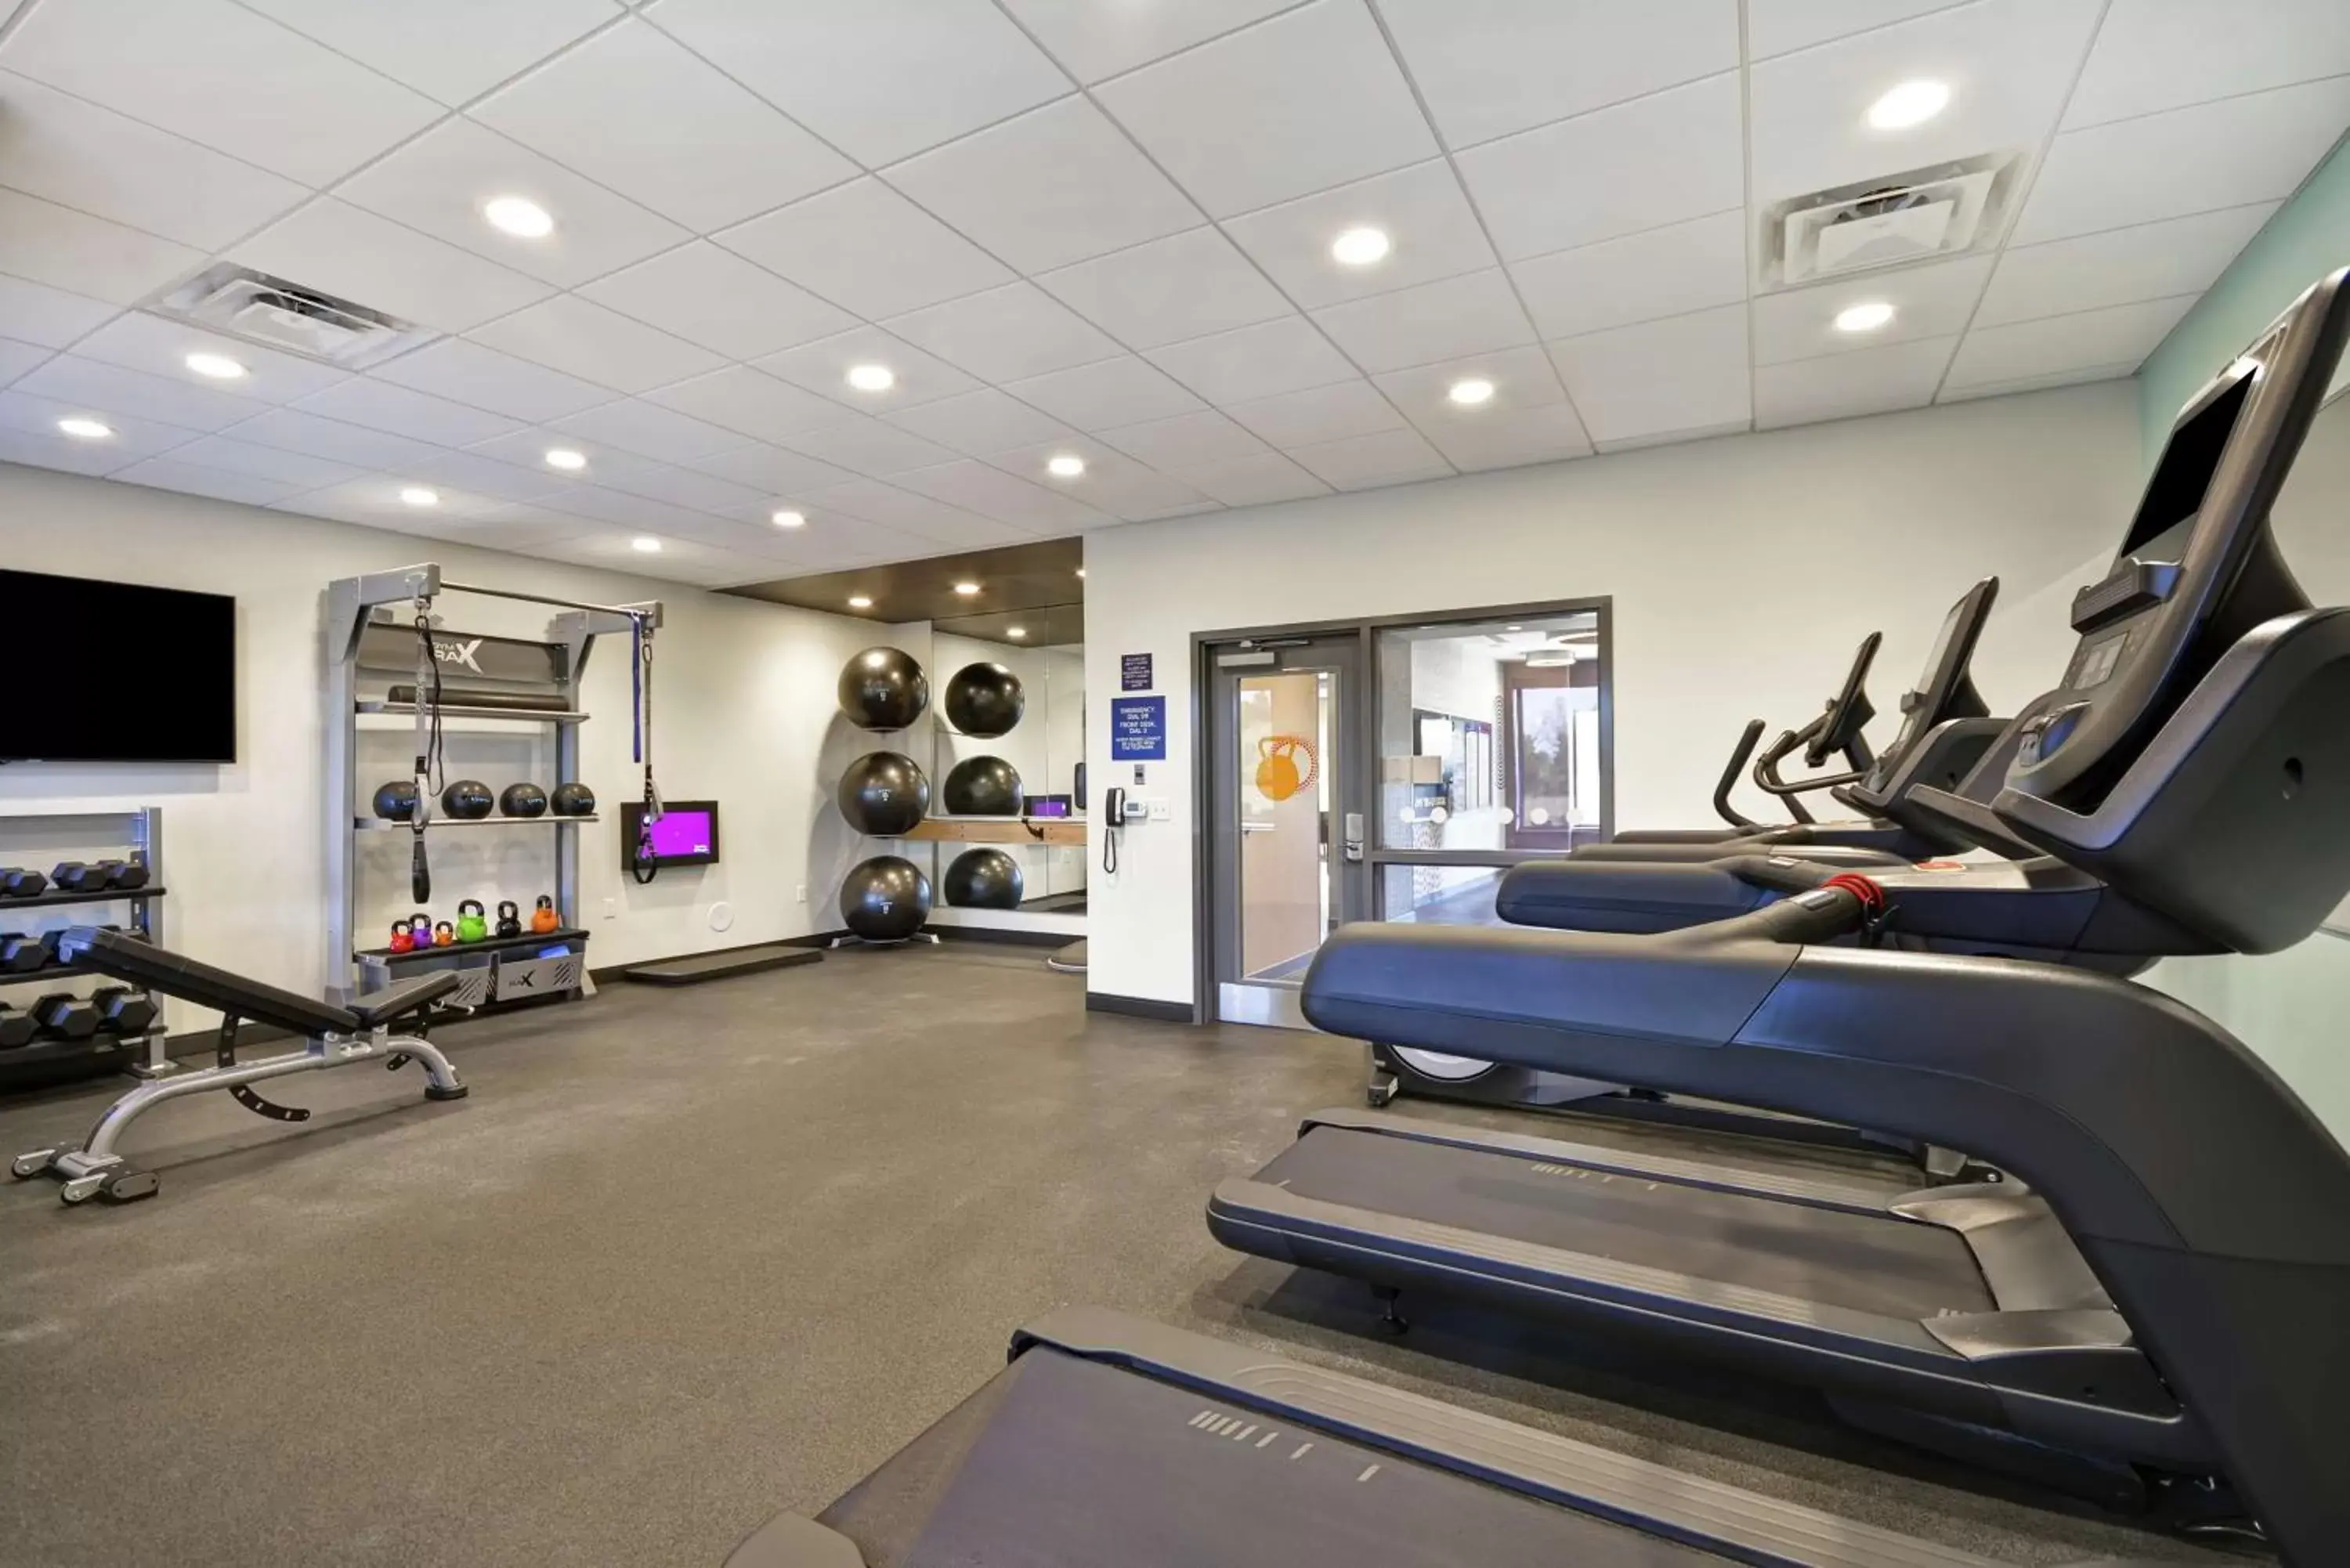 Fitness centre/facilities, Fitness Center/Facilities in Tru By Hilton Huber Heights Dayton